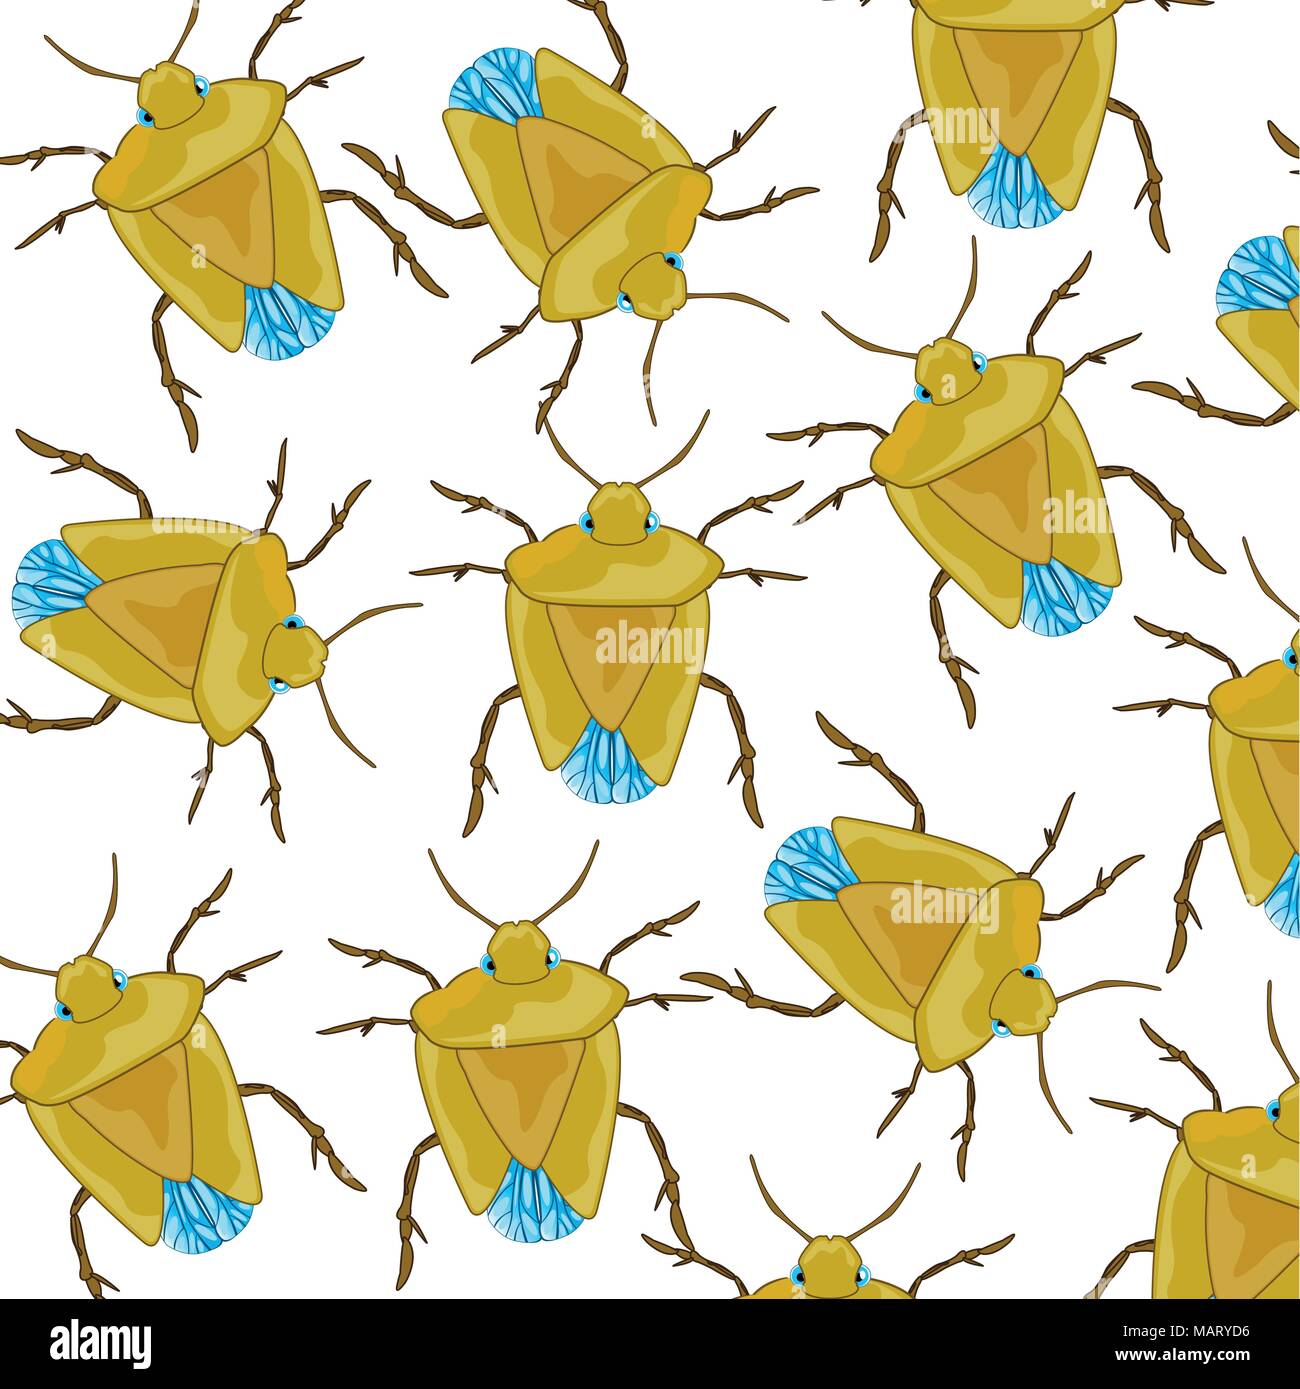 Insect bedbug pattern Stock Vector